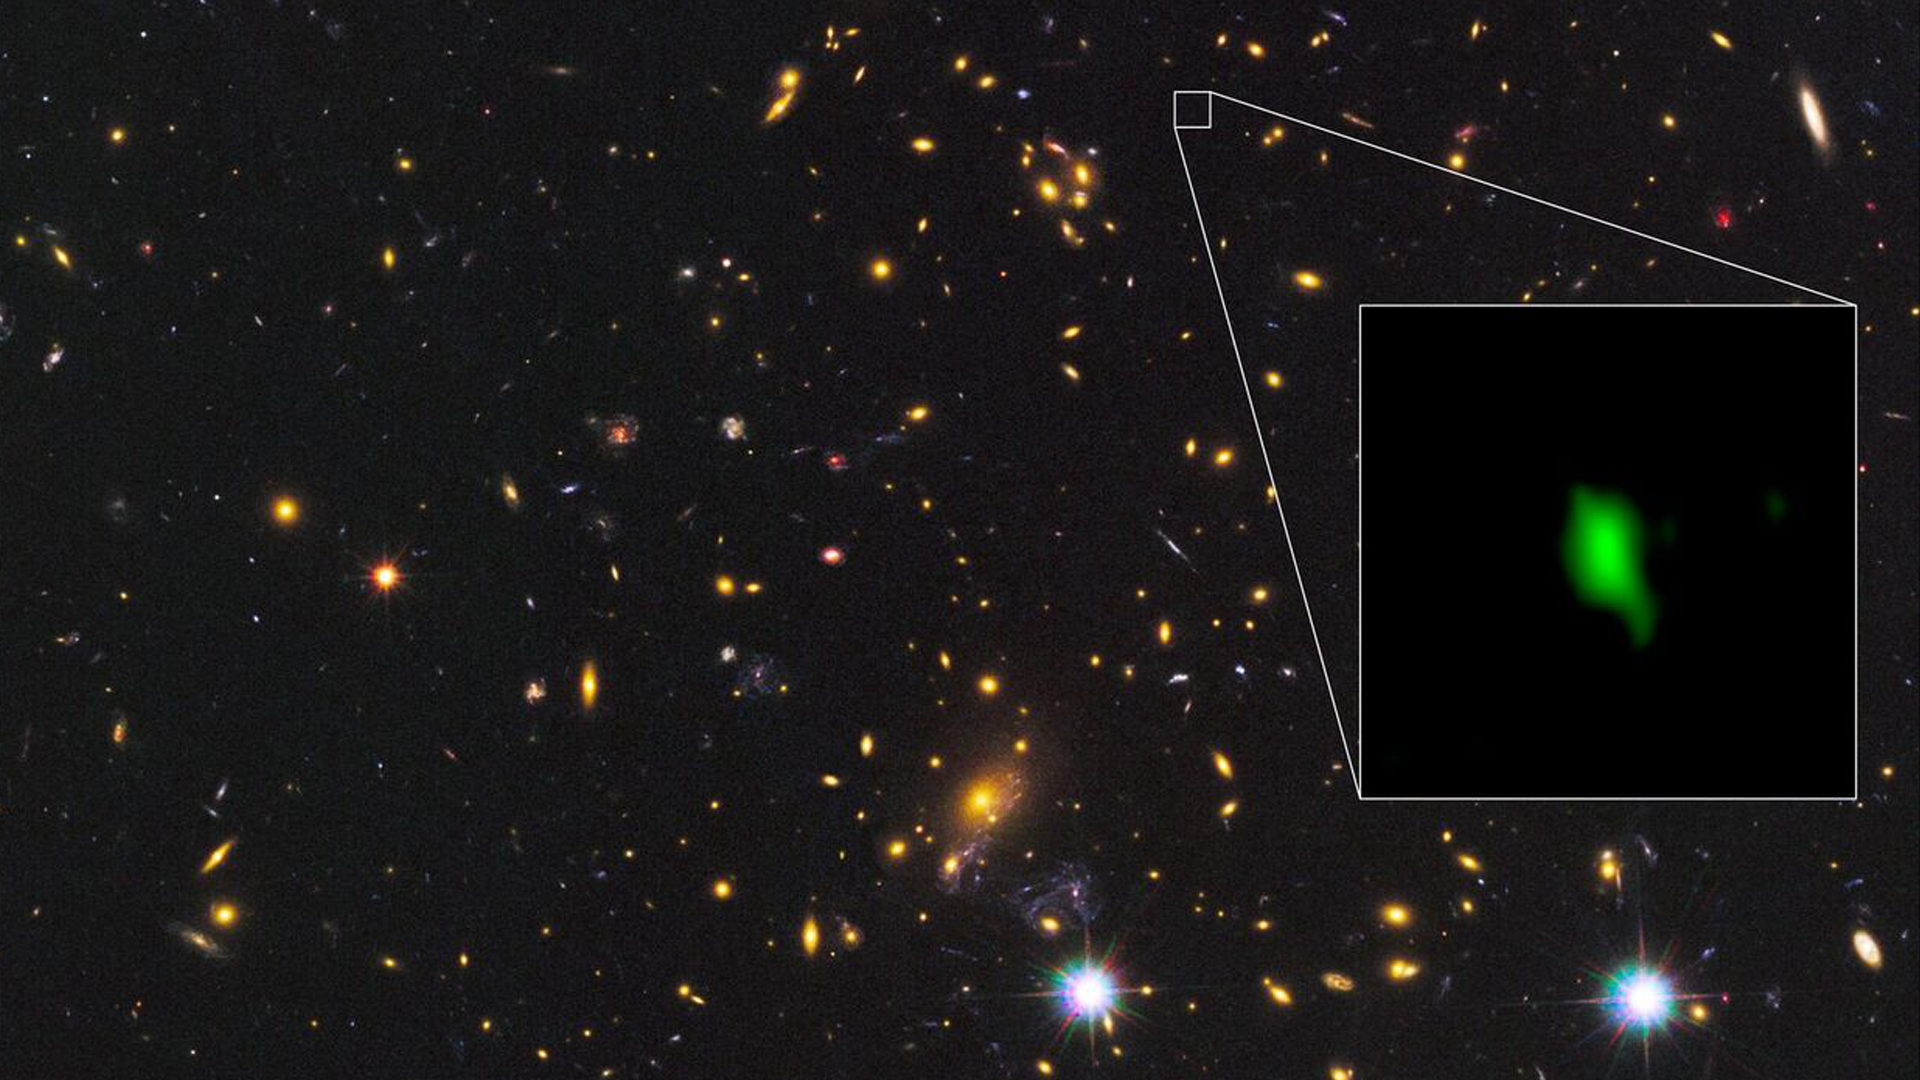 An image of the galaxy cluster MACS J1149.5+2223 taken with the Hubble Space Telescope. Inset image is the galaxy MACS1149-JD1 observed with ALMA. Oxygen detected with ALMA is depicted in green.